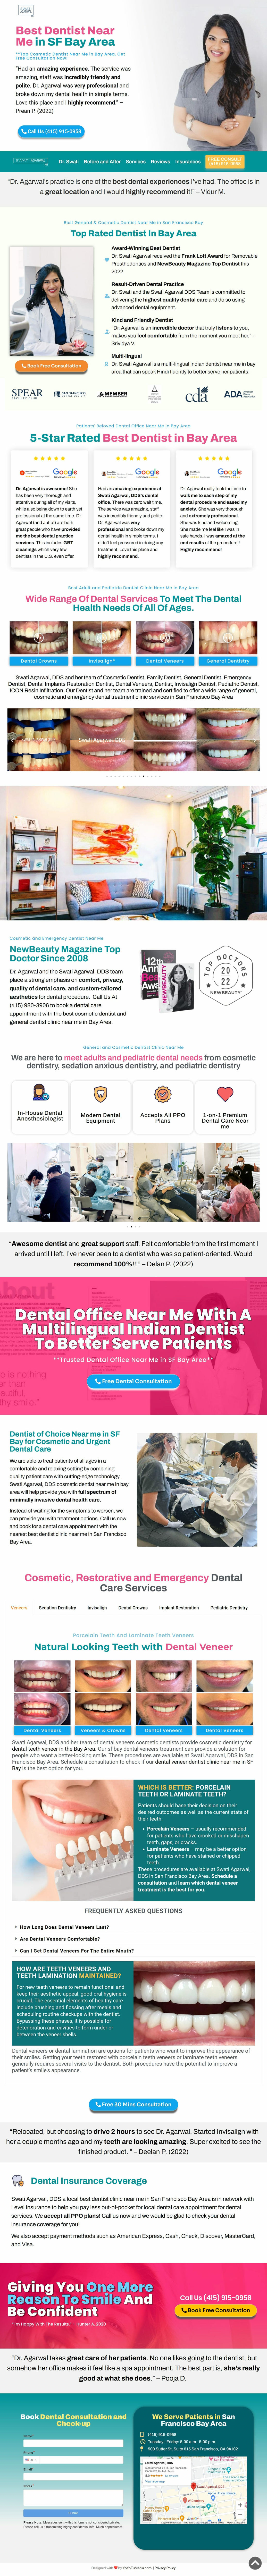 Google ads for cosmetic dentist landing pages design